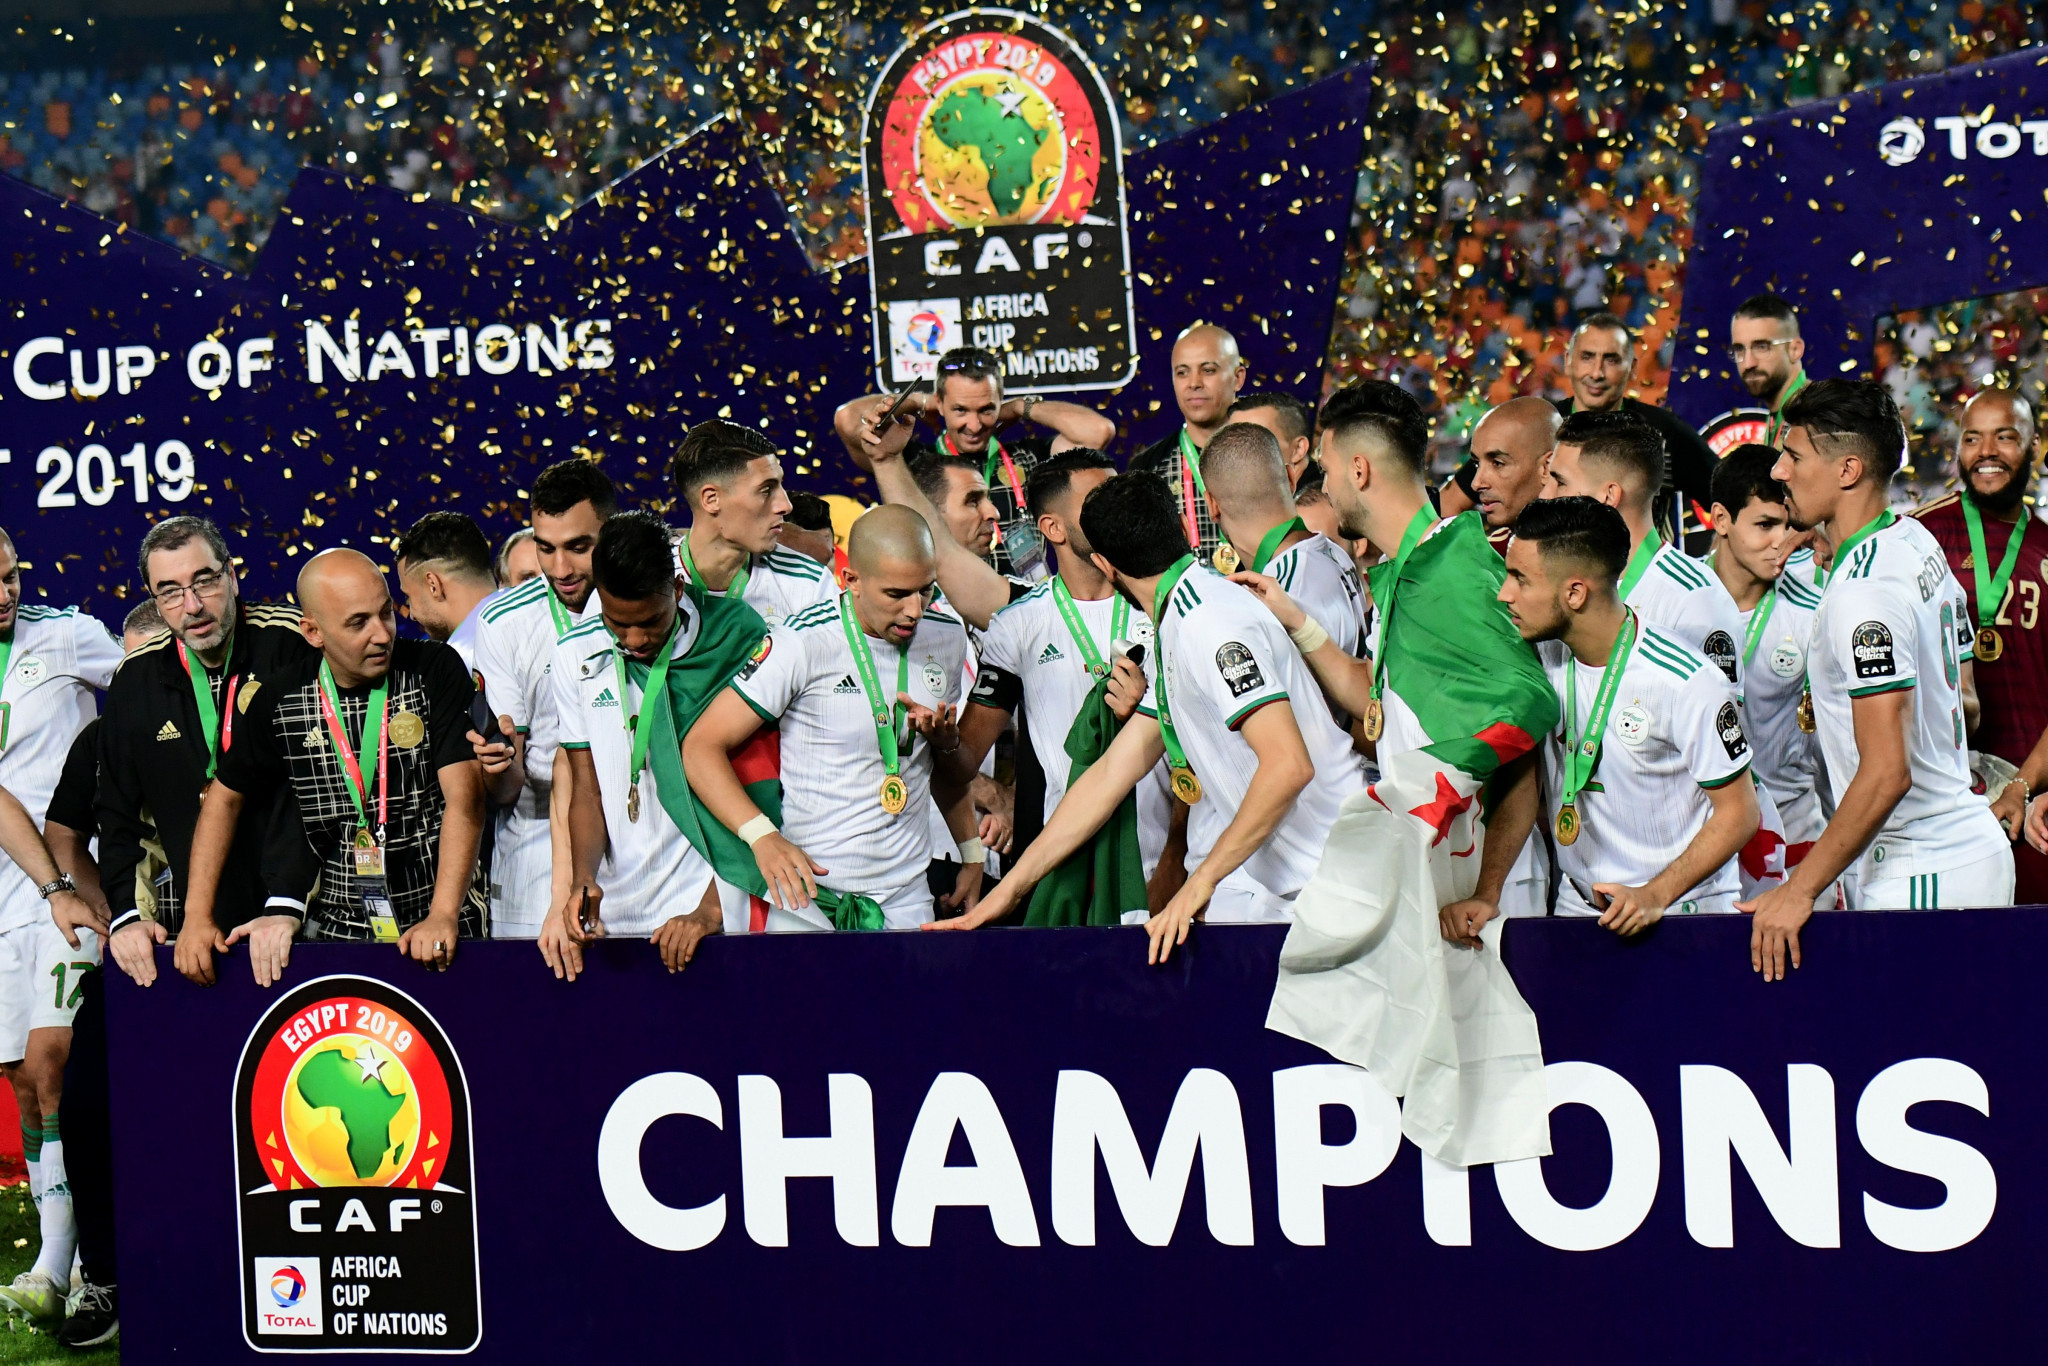 Africa Cup of Nations 2021: All you need to know | The Konversation